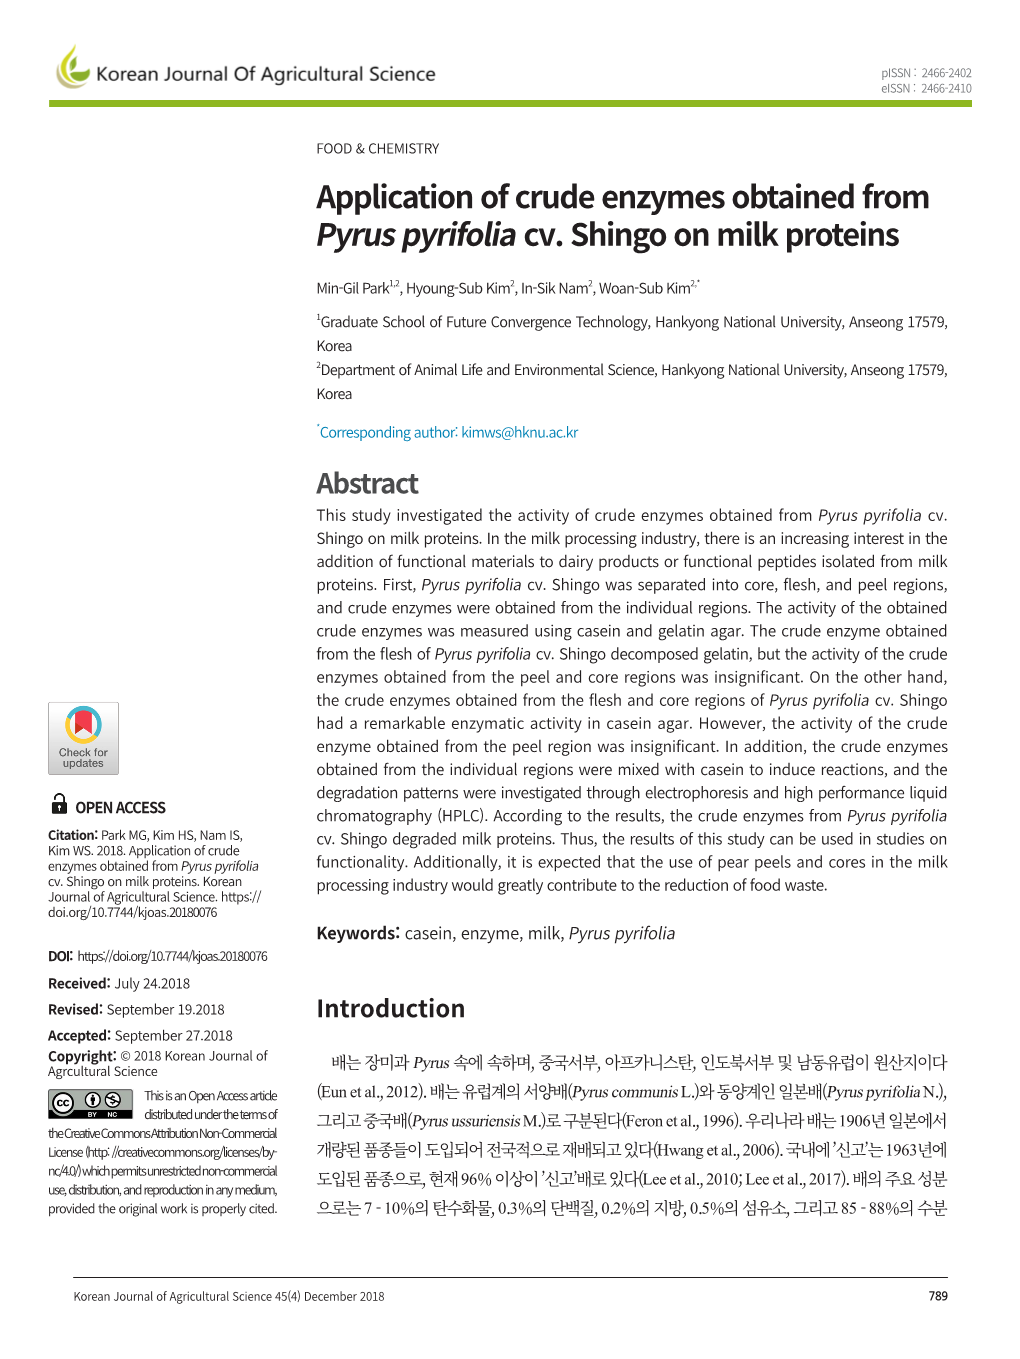 Application of Crude Enzymes Obtained from Pyrus Pyrifolia Cv